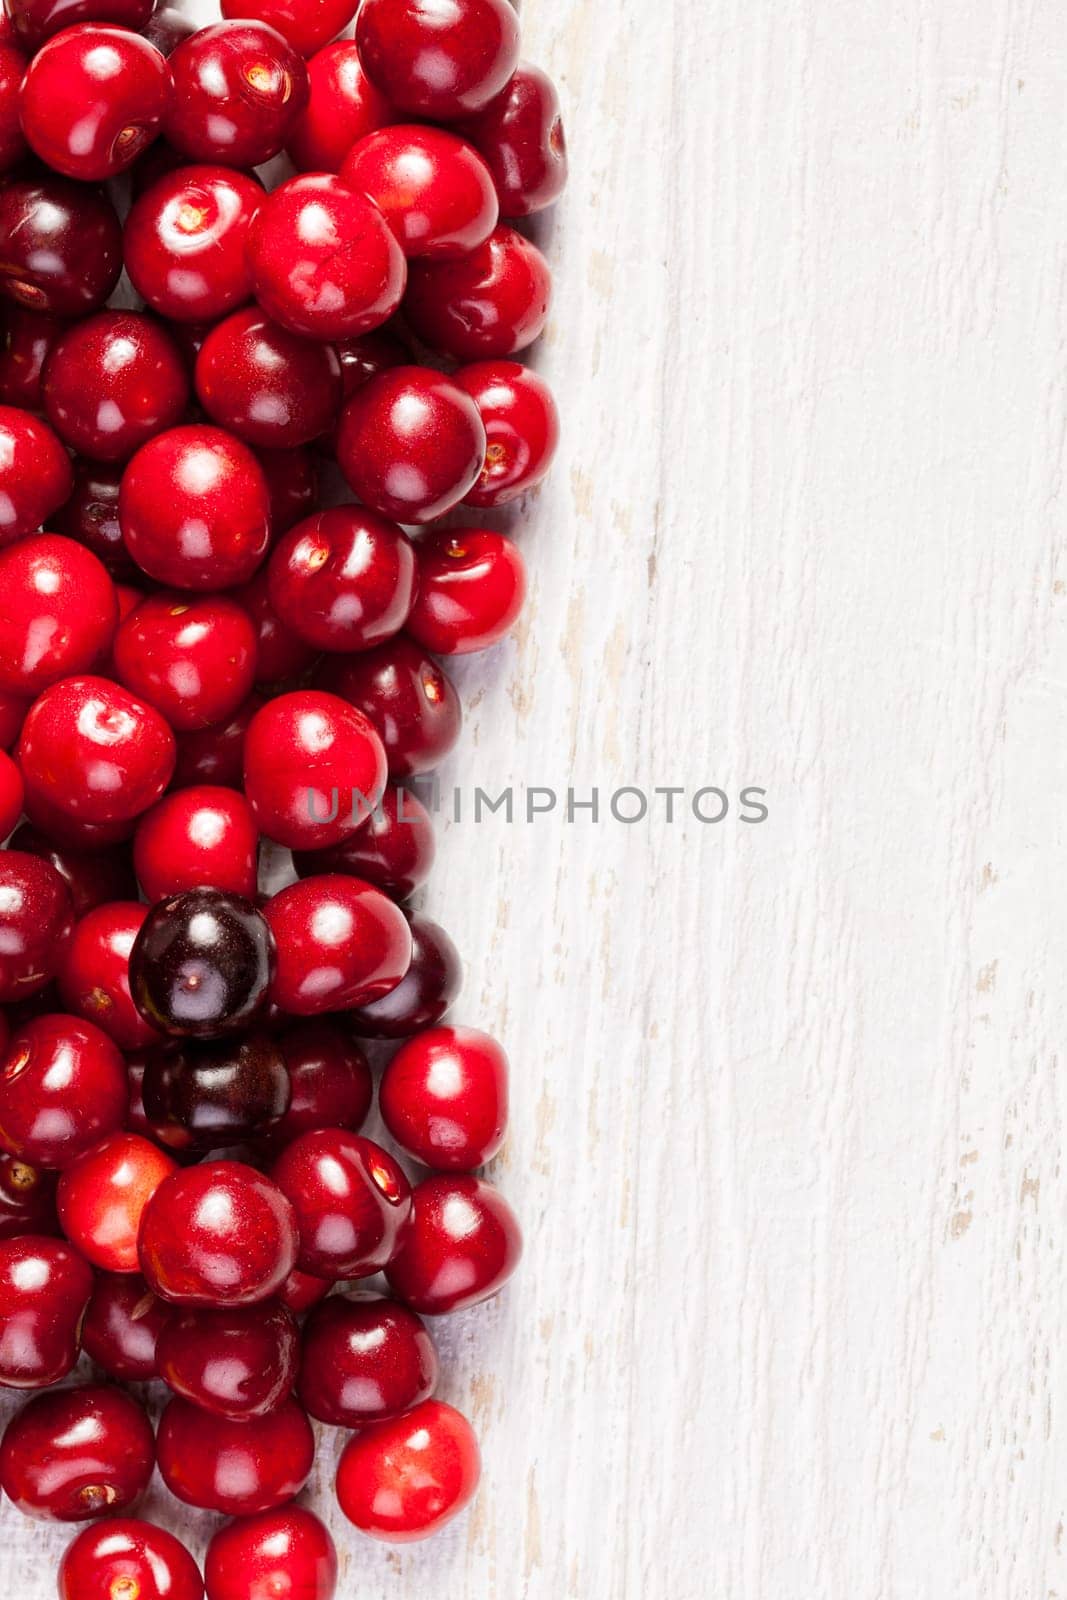 Delicious cherries on white wooden background by DCStudio